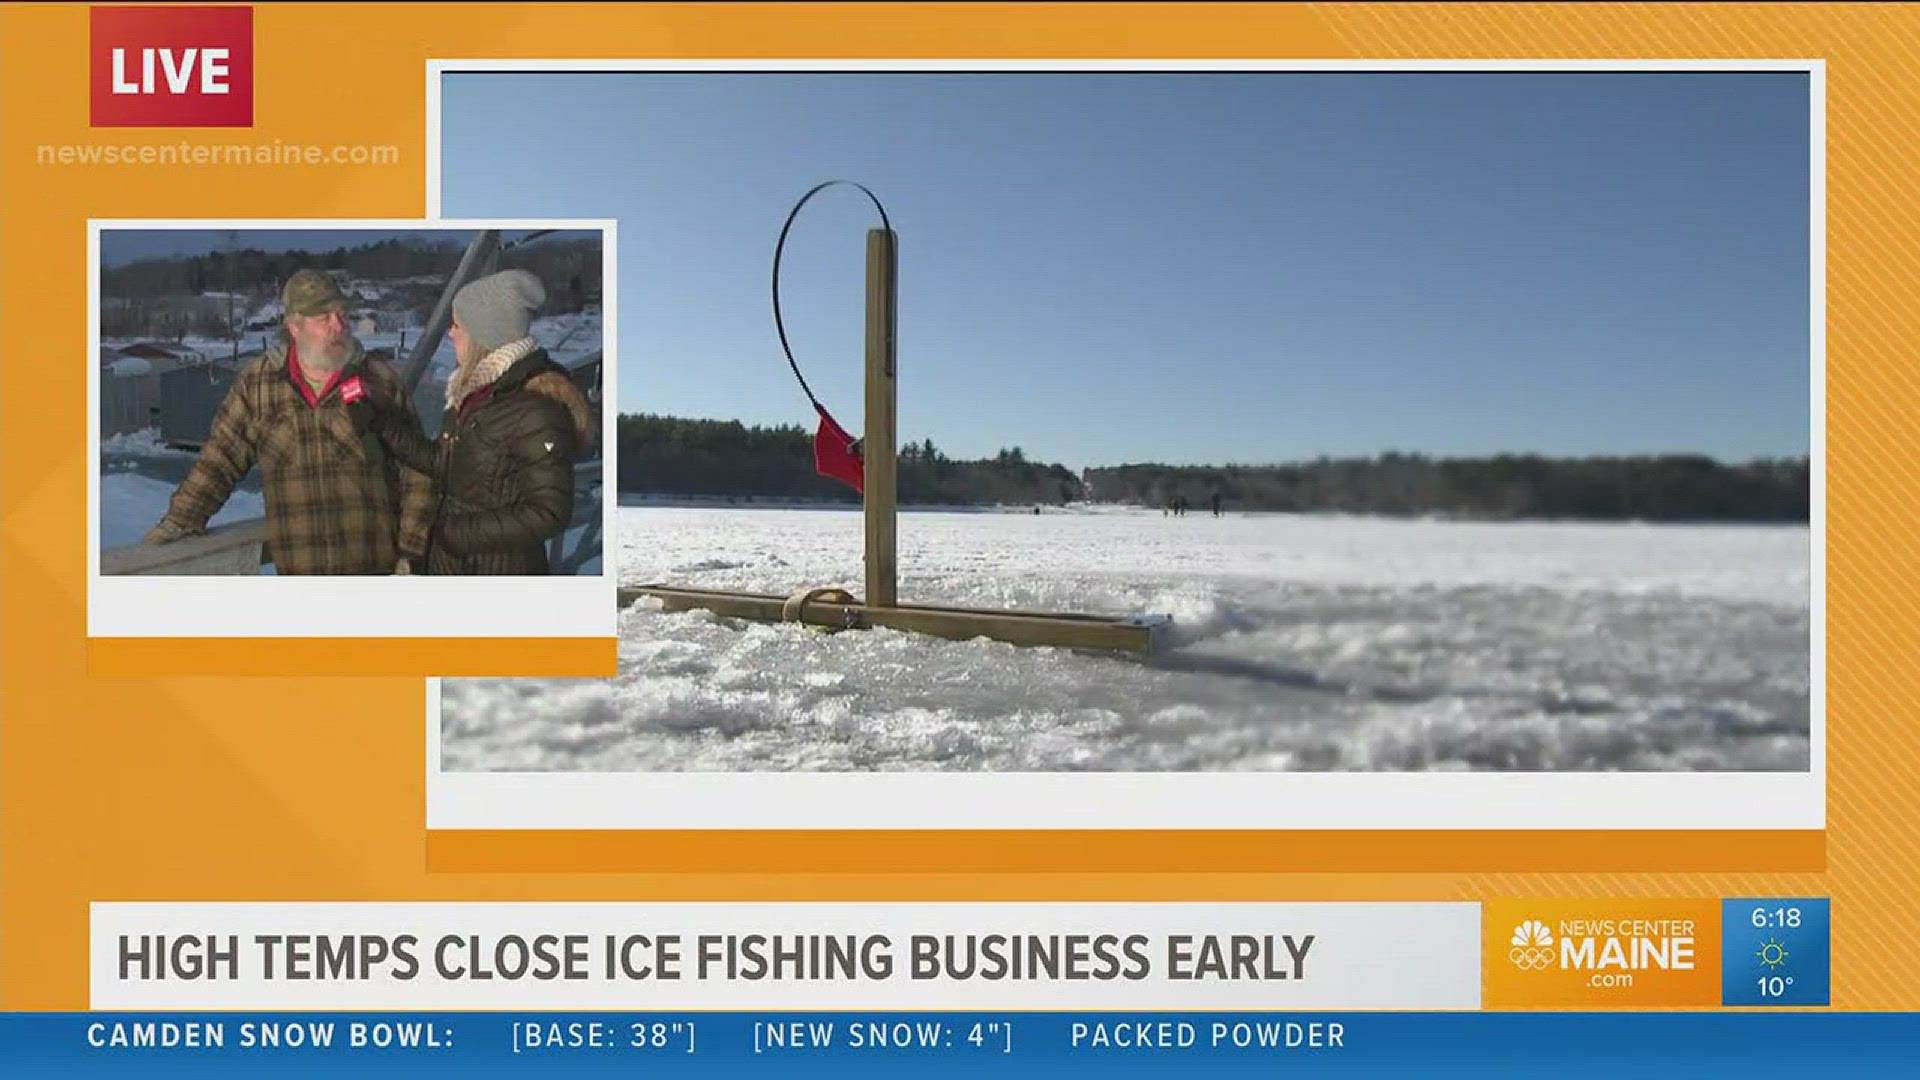 High temps affecting ice fishing